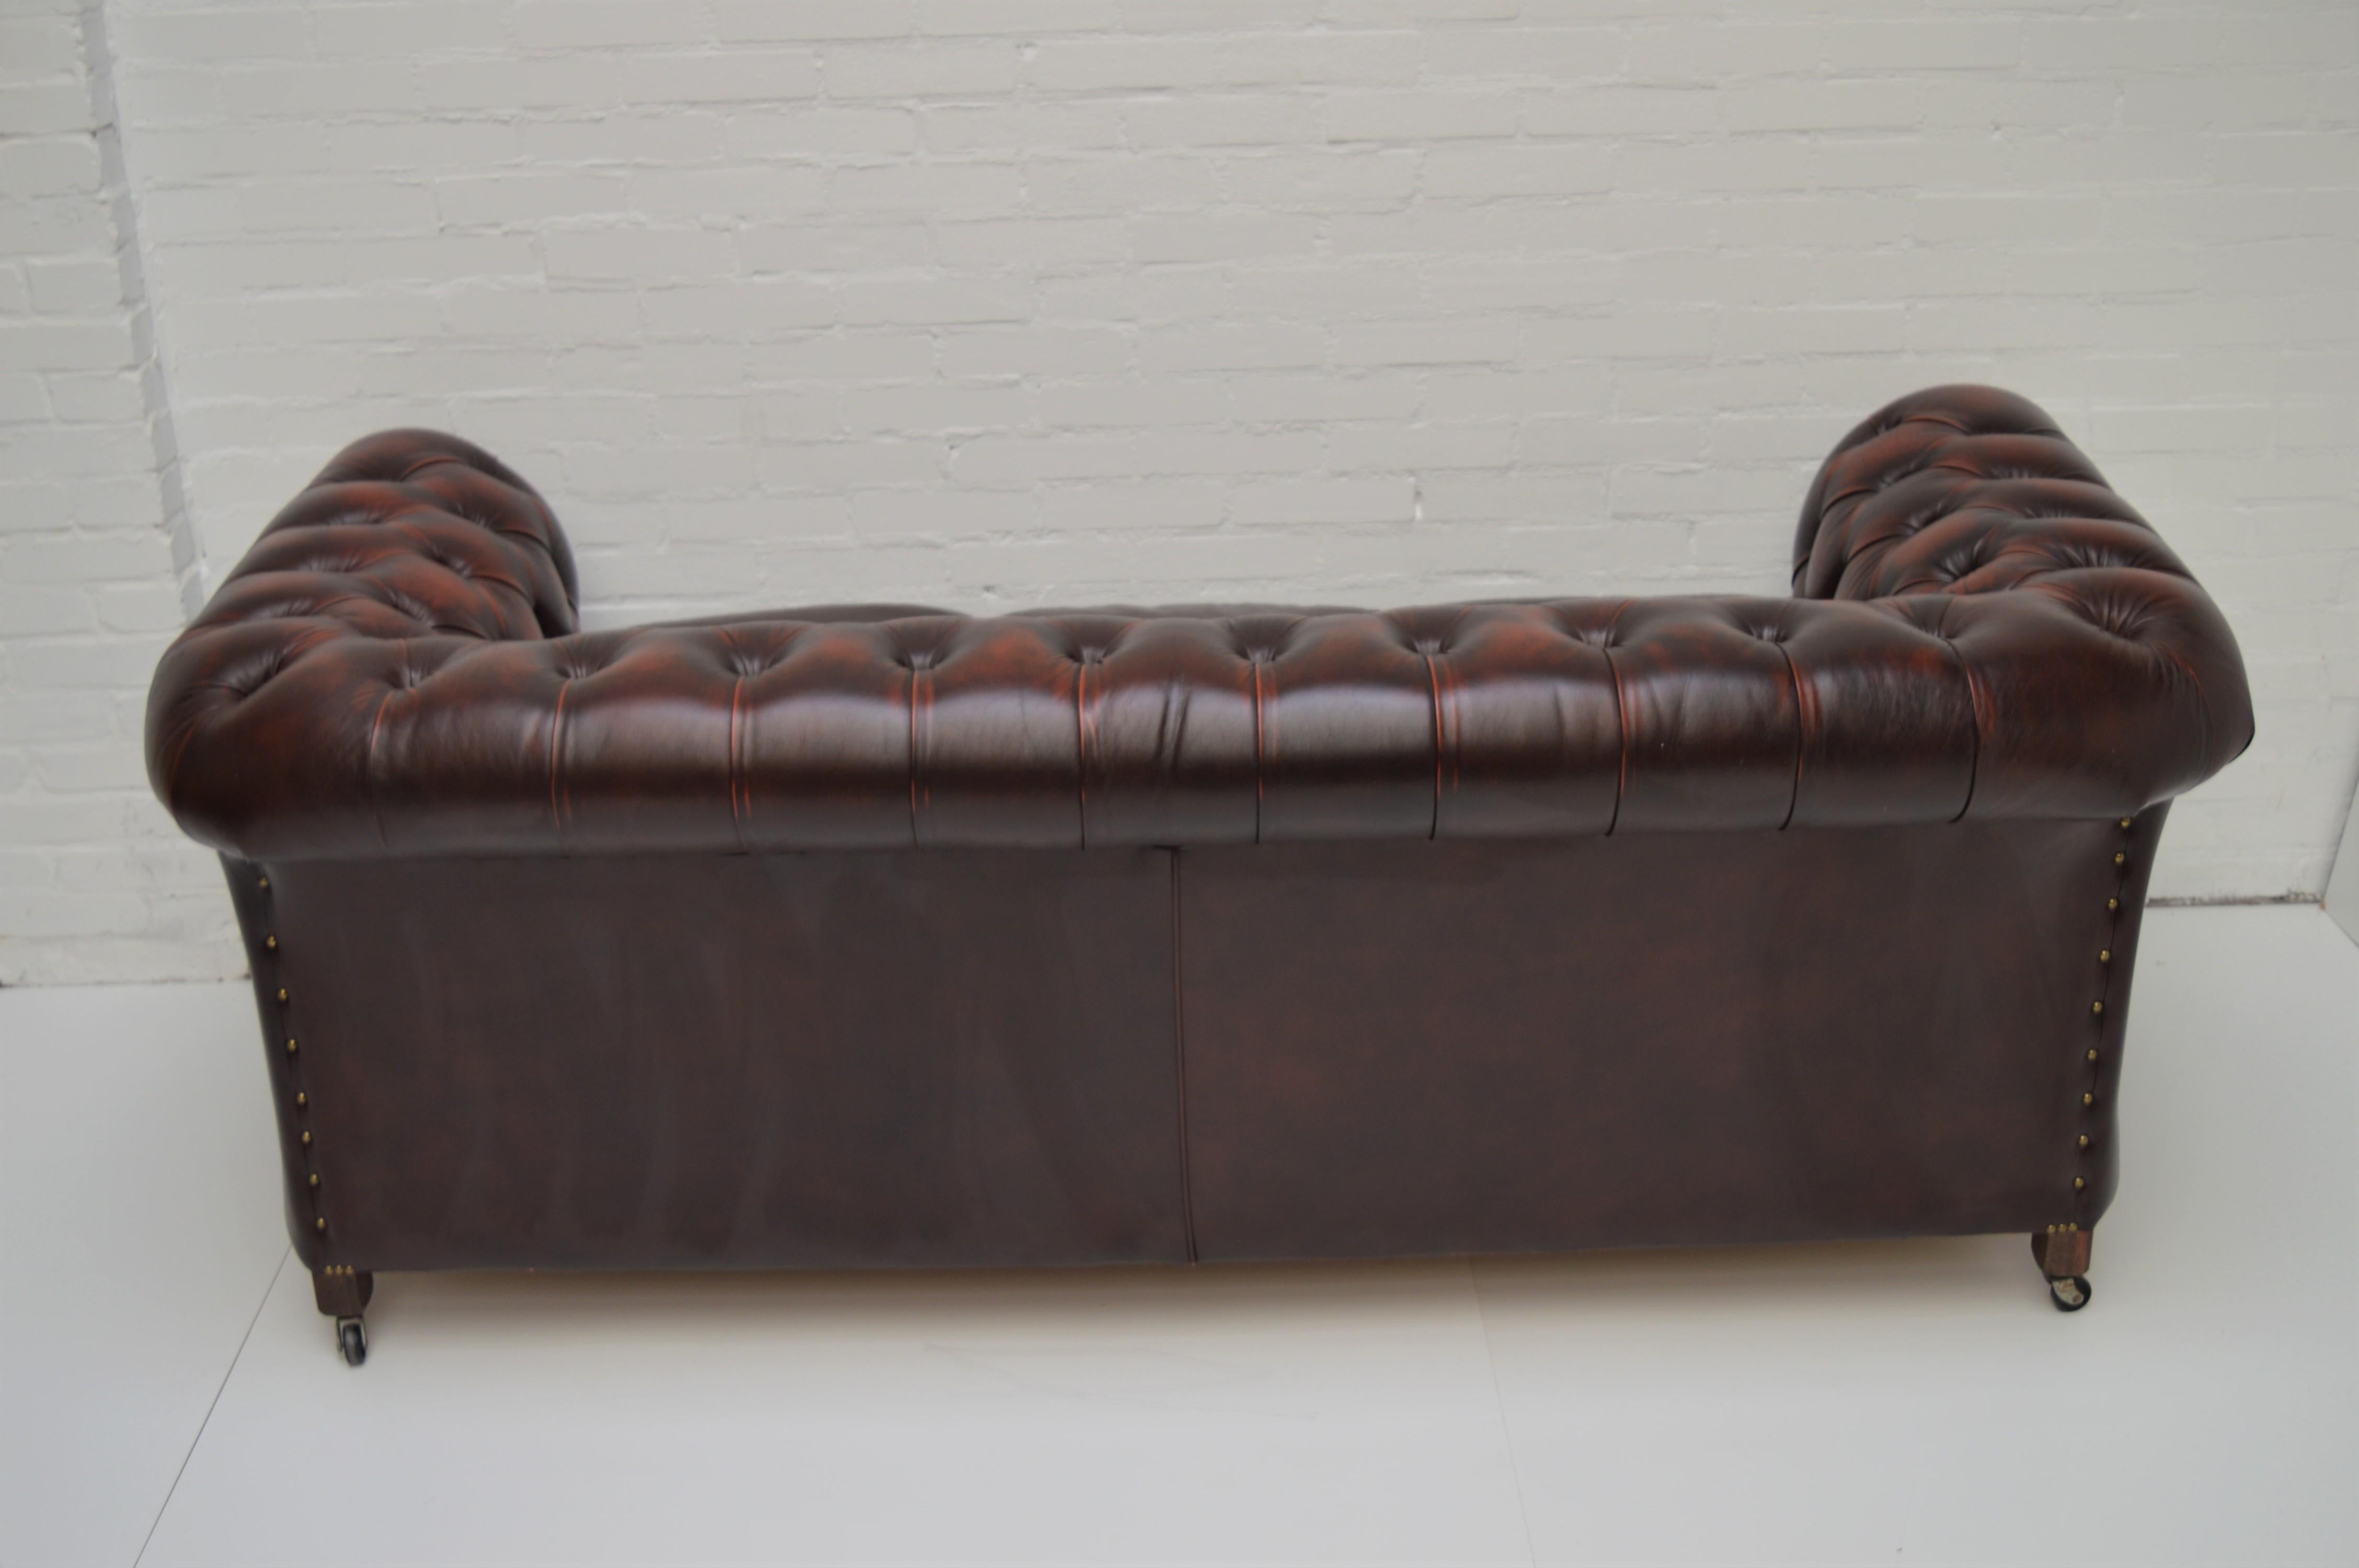 Antique Tan Chesterfield Sofa with Brass Castors / Wheels For Sale 2